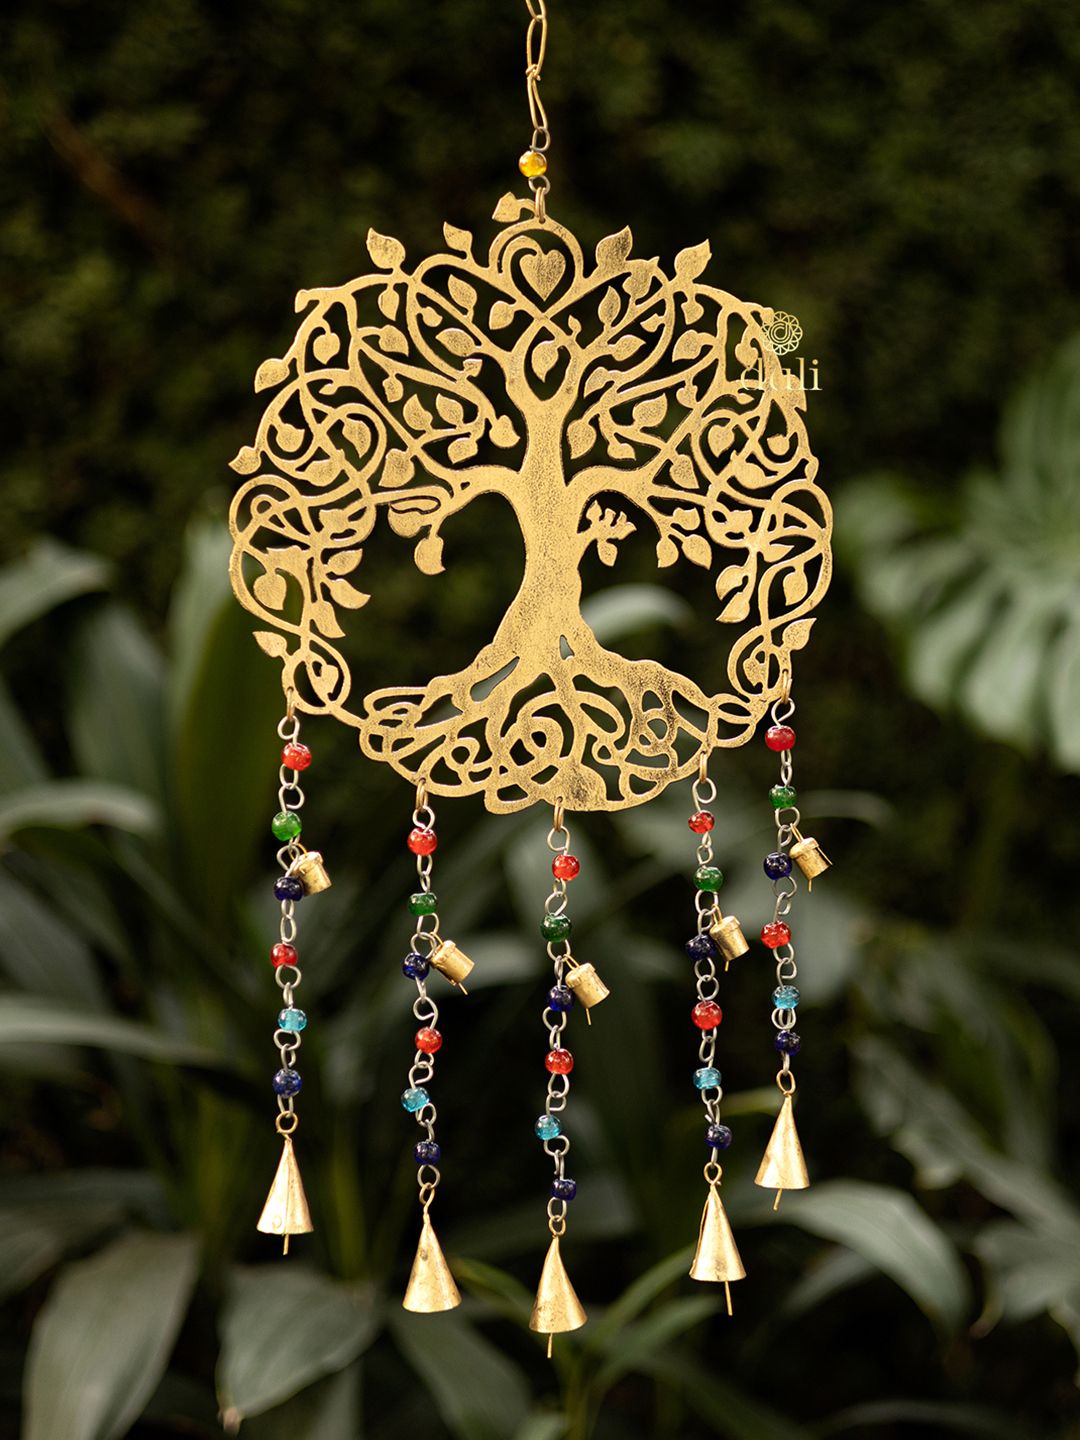 DULI Gold-Toned Tree of Life Design Big Metal Windchime with Hanging Bells Price in India